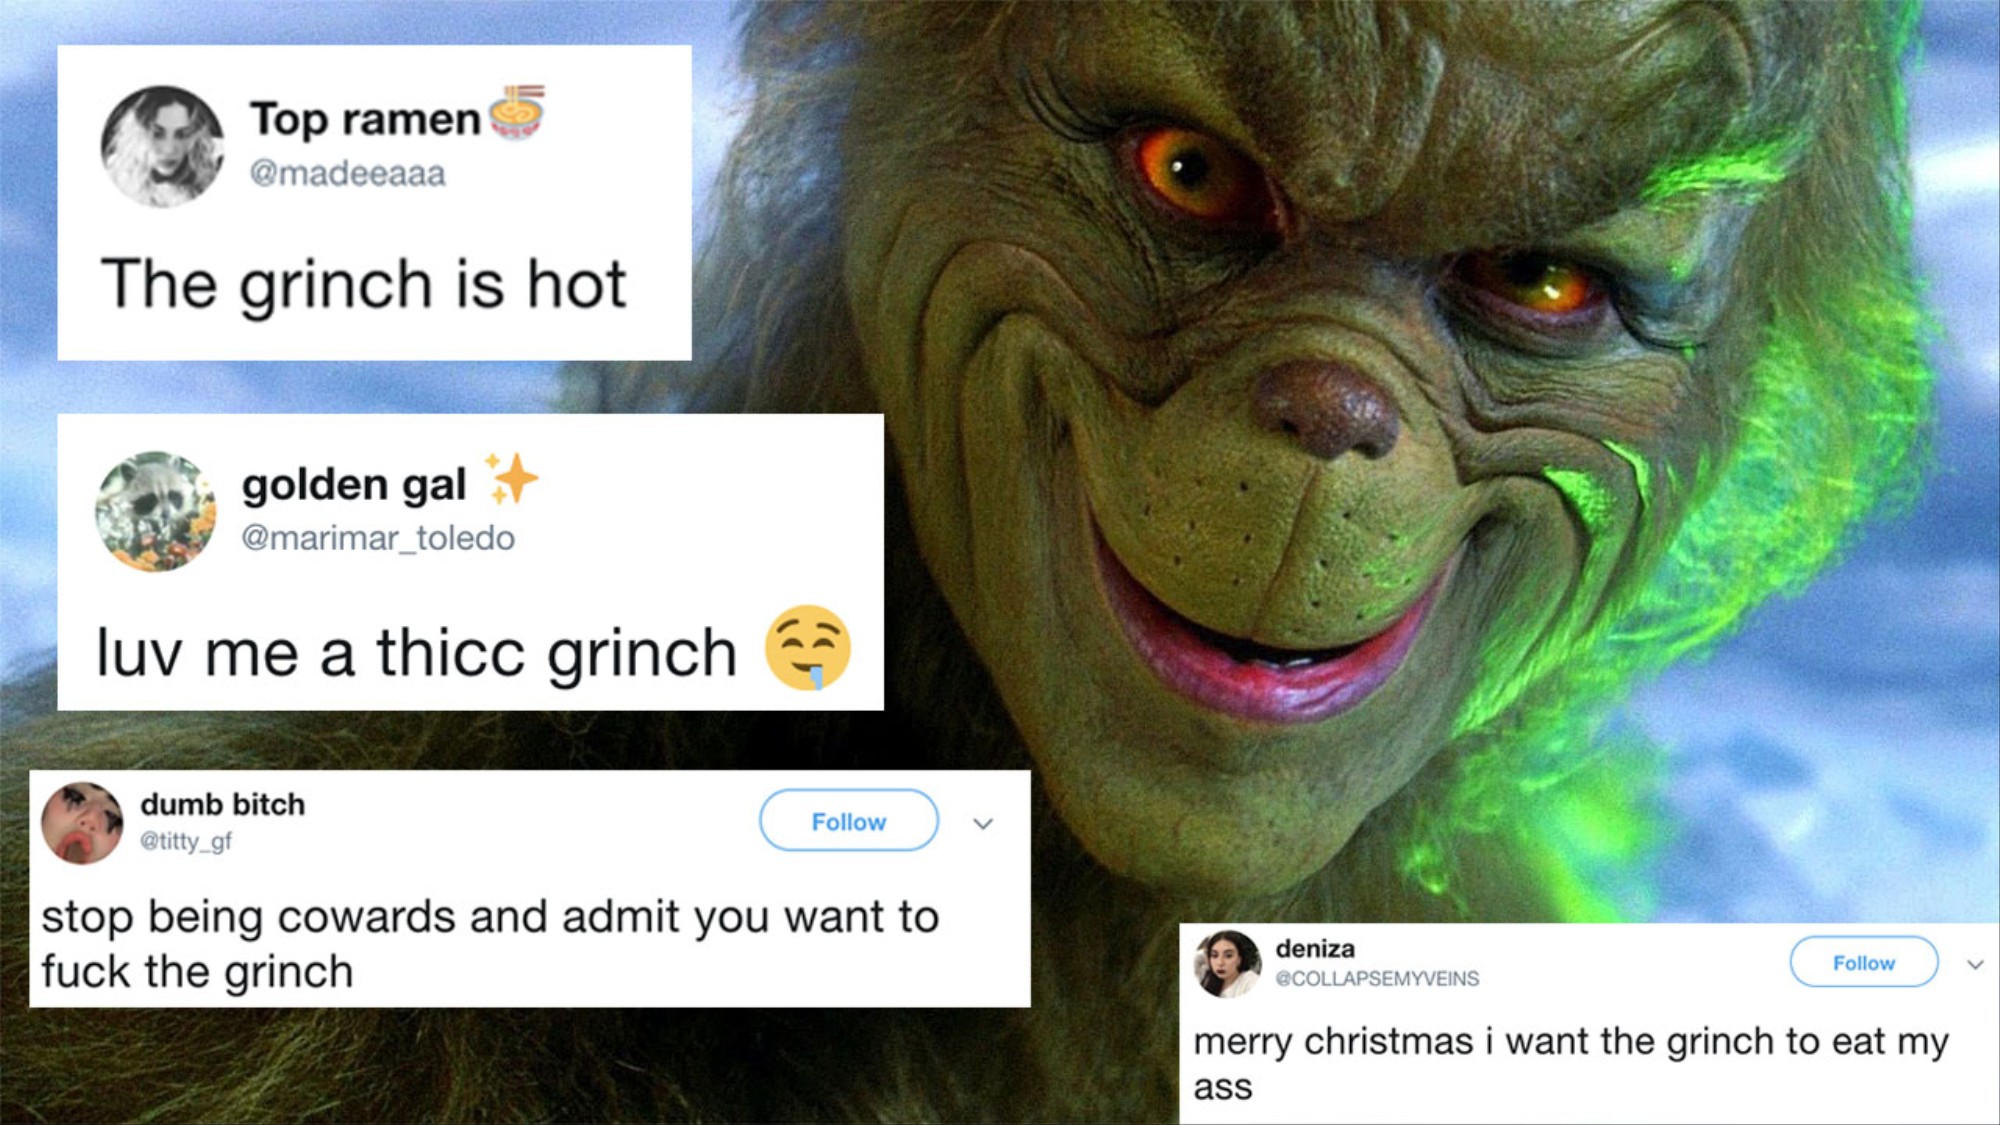 Grinch Stole Christmas Cartoon Porn - People Want to Fuck the Grinch - VICE